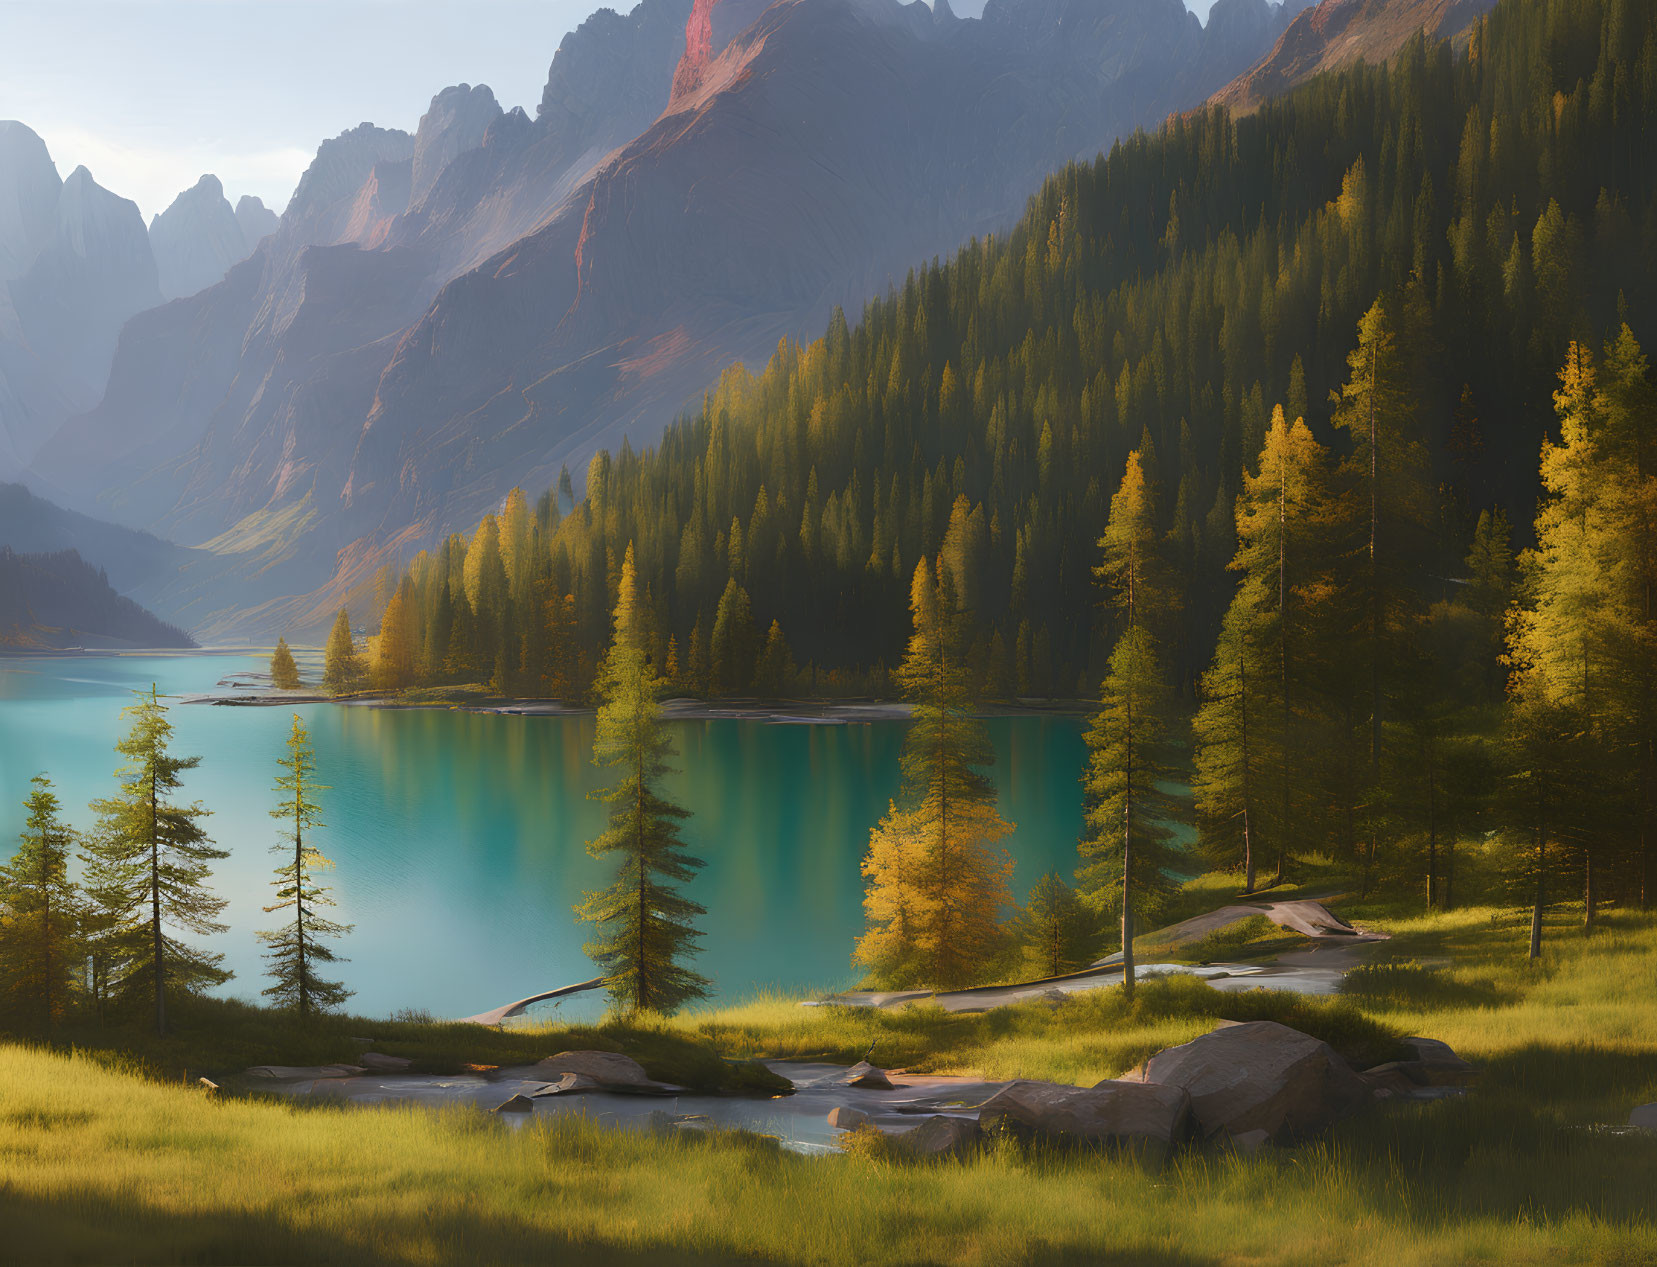 Tranquil landscape with clear lake, pine trees, and mountains